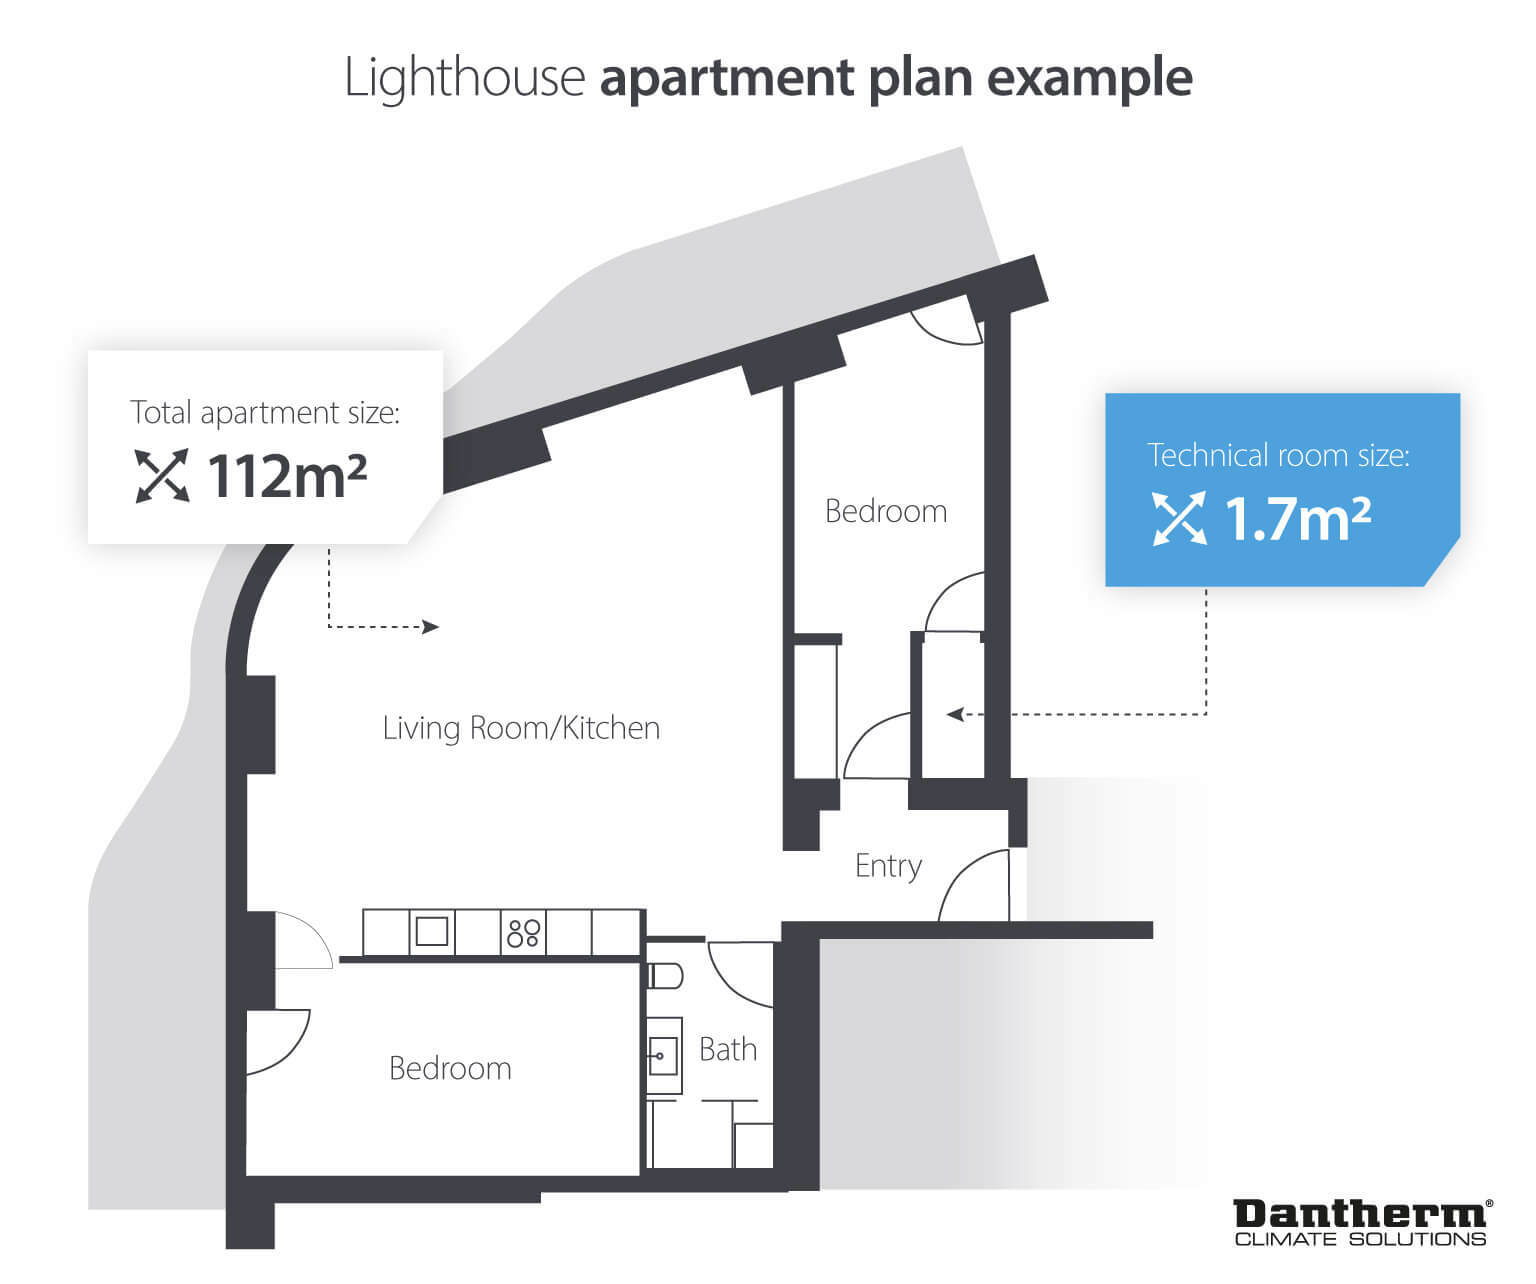 Lighthouse residential plan to assess ventilation requirements - infographic image